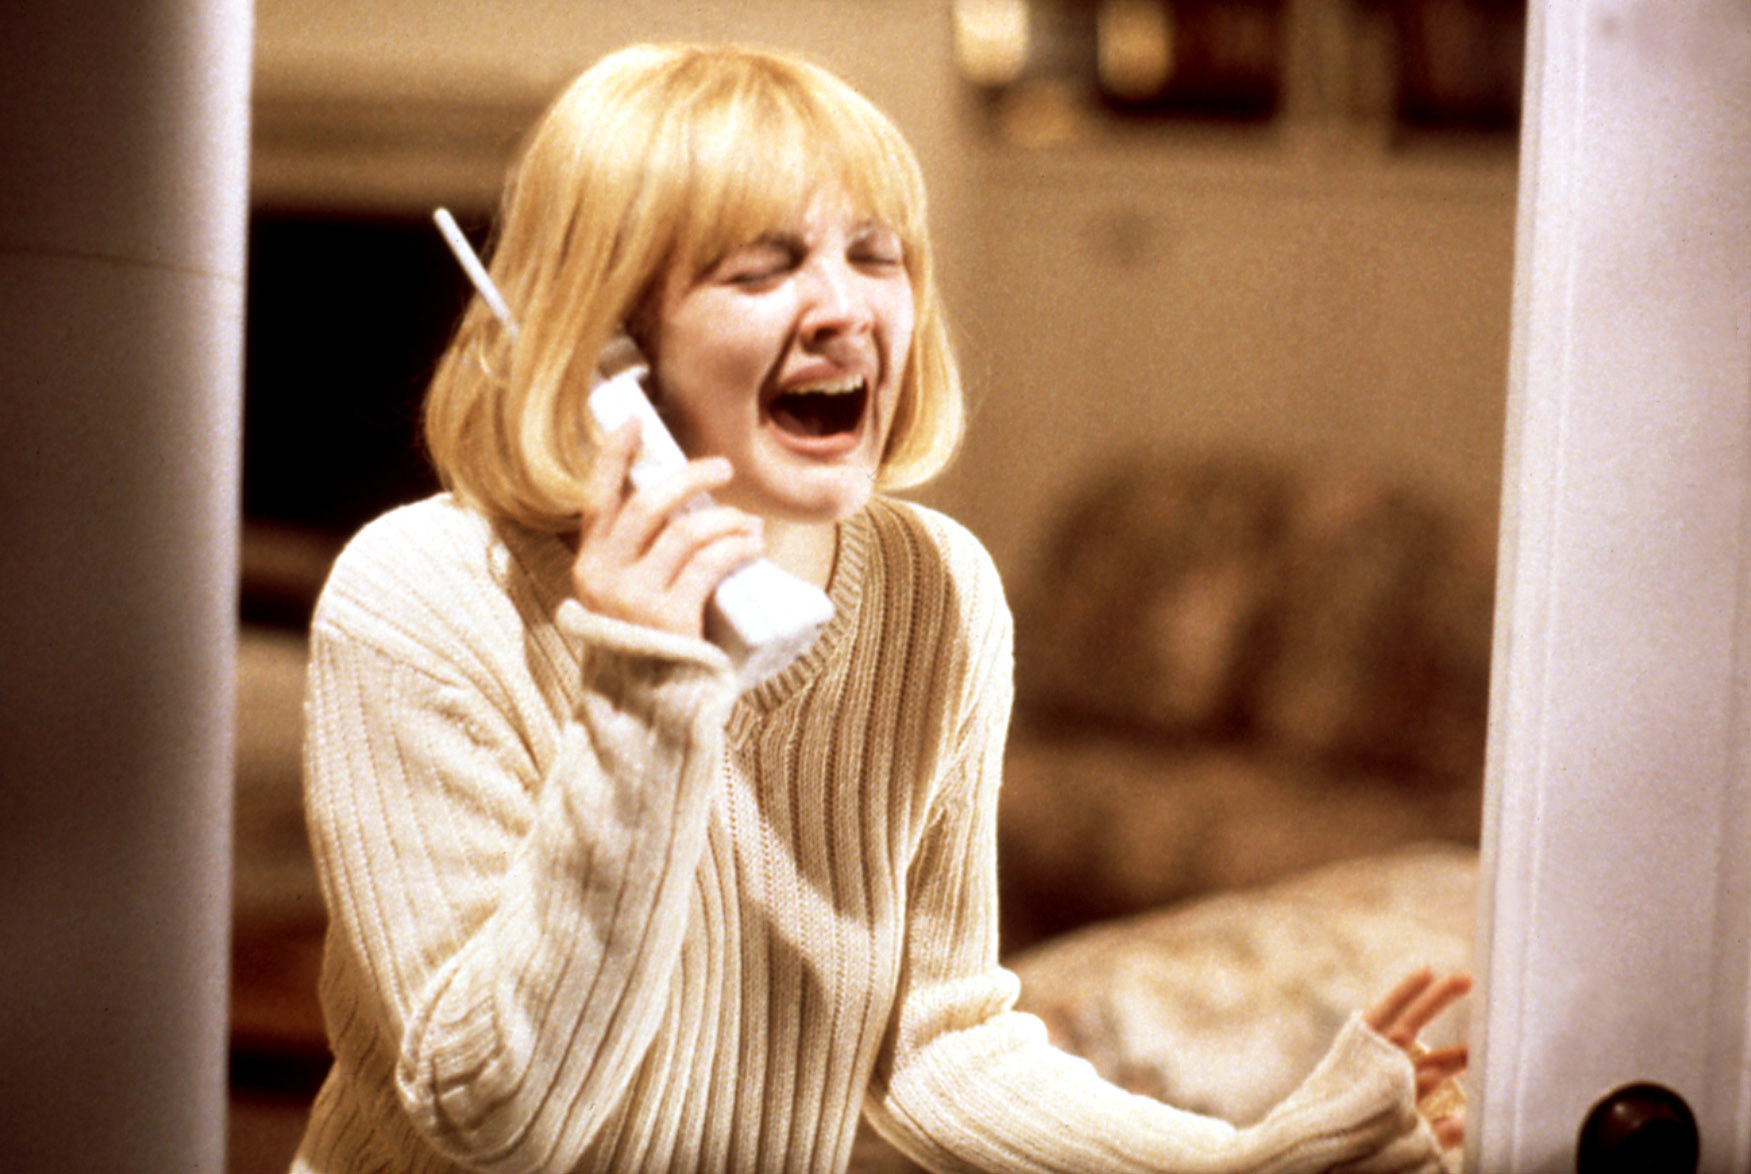 Drew Barrymore in a blonde bob wig, holding an old house telephone screaming